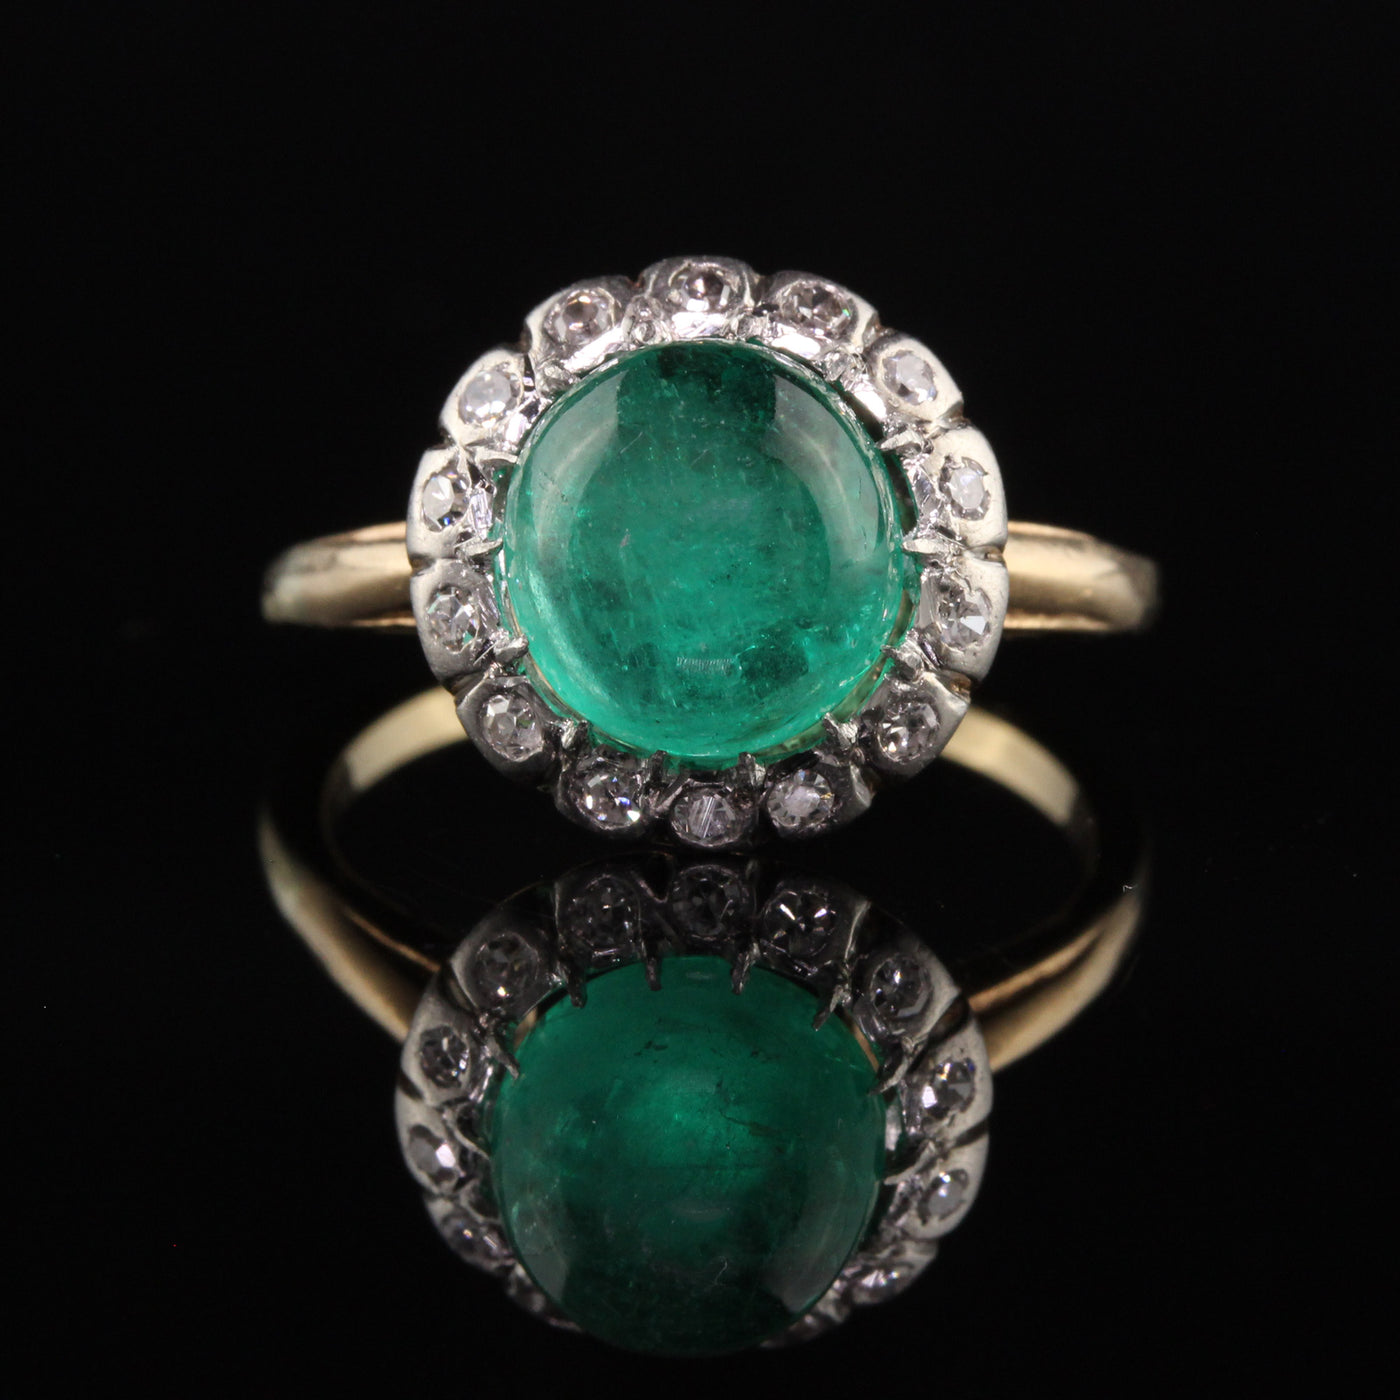 Antique Edwardian 14K Yellow Gold Platinum Top Colombian Emerald Engagement Ring